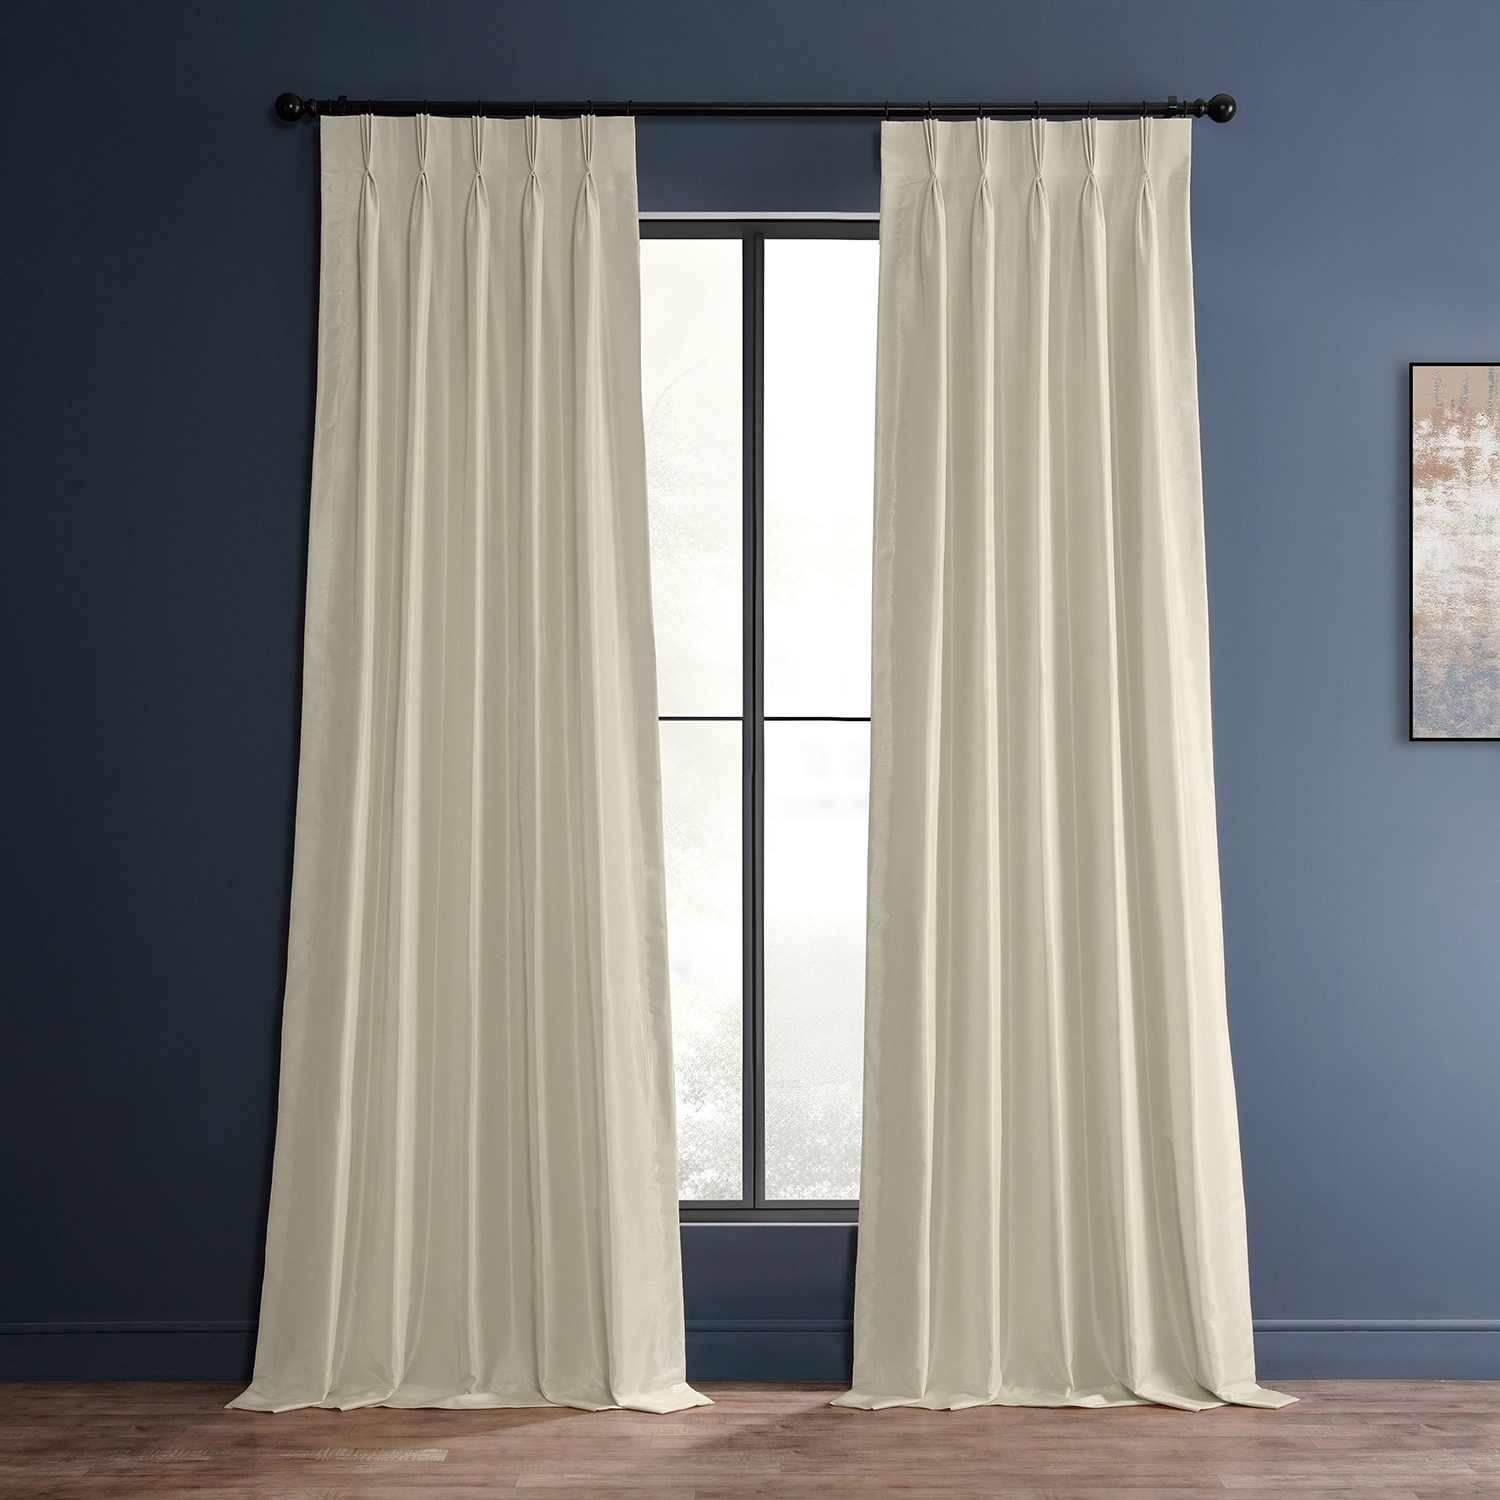 Custom Pleated Lined Drapes in White Cotton Duck